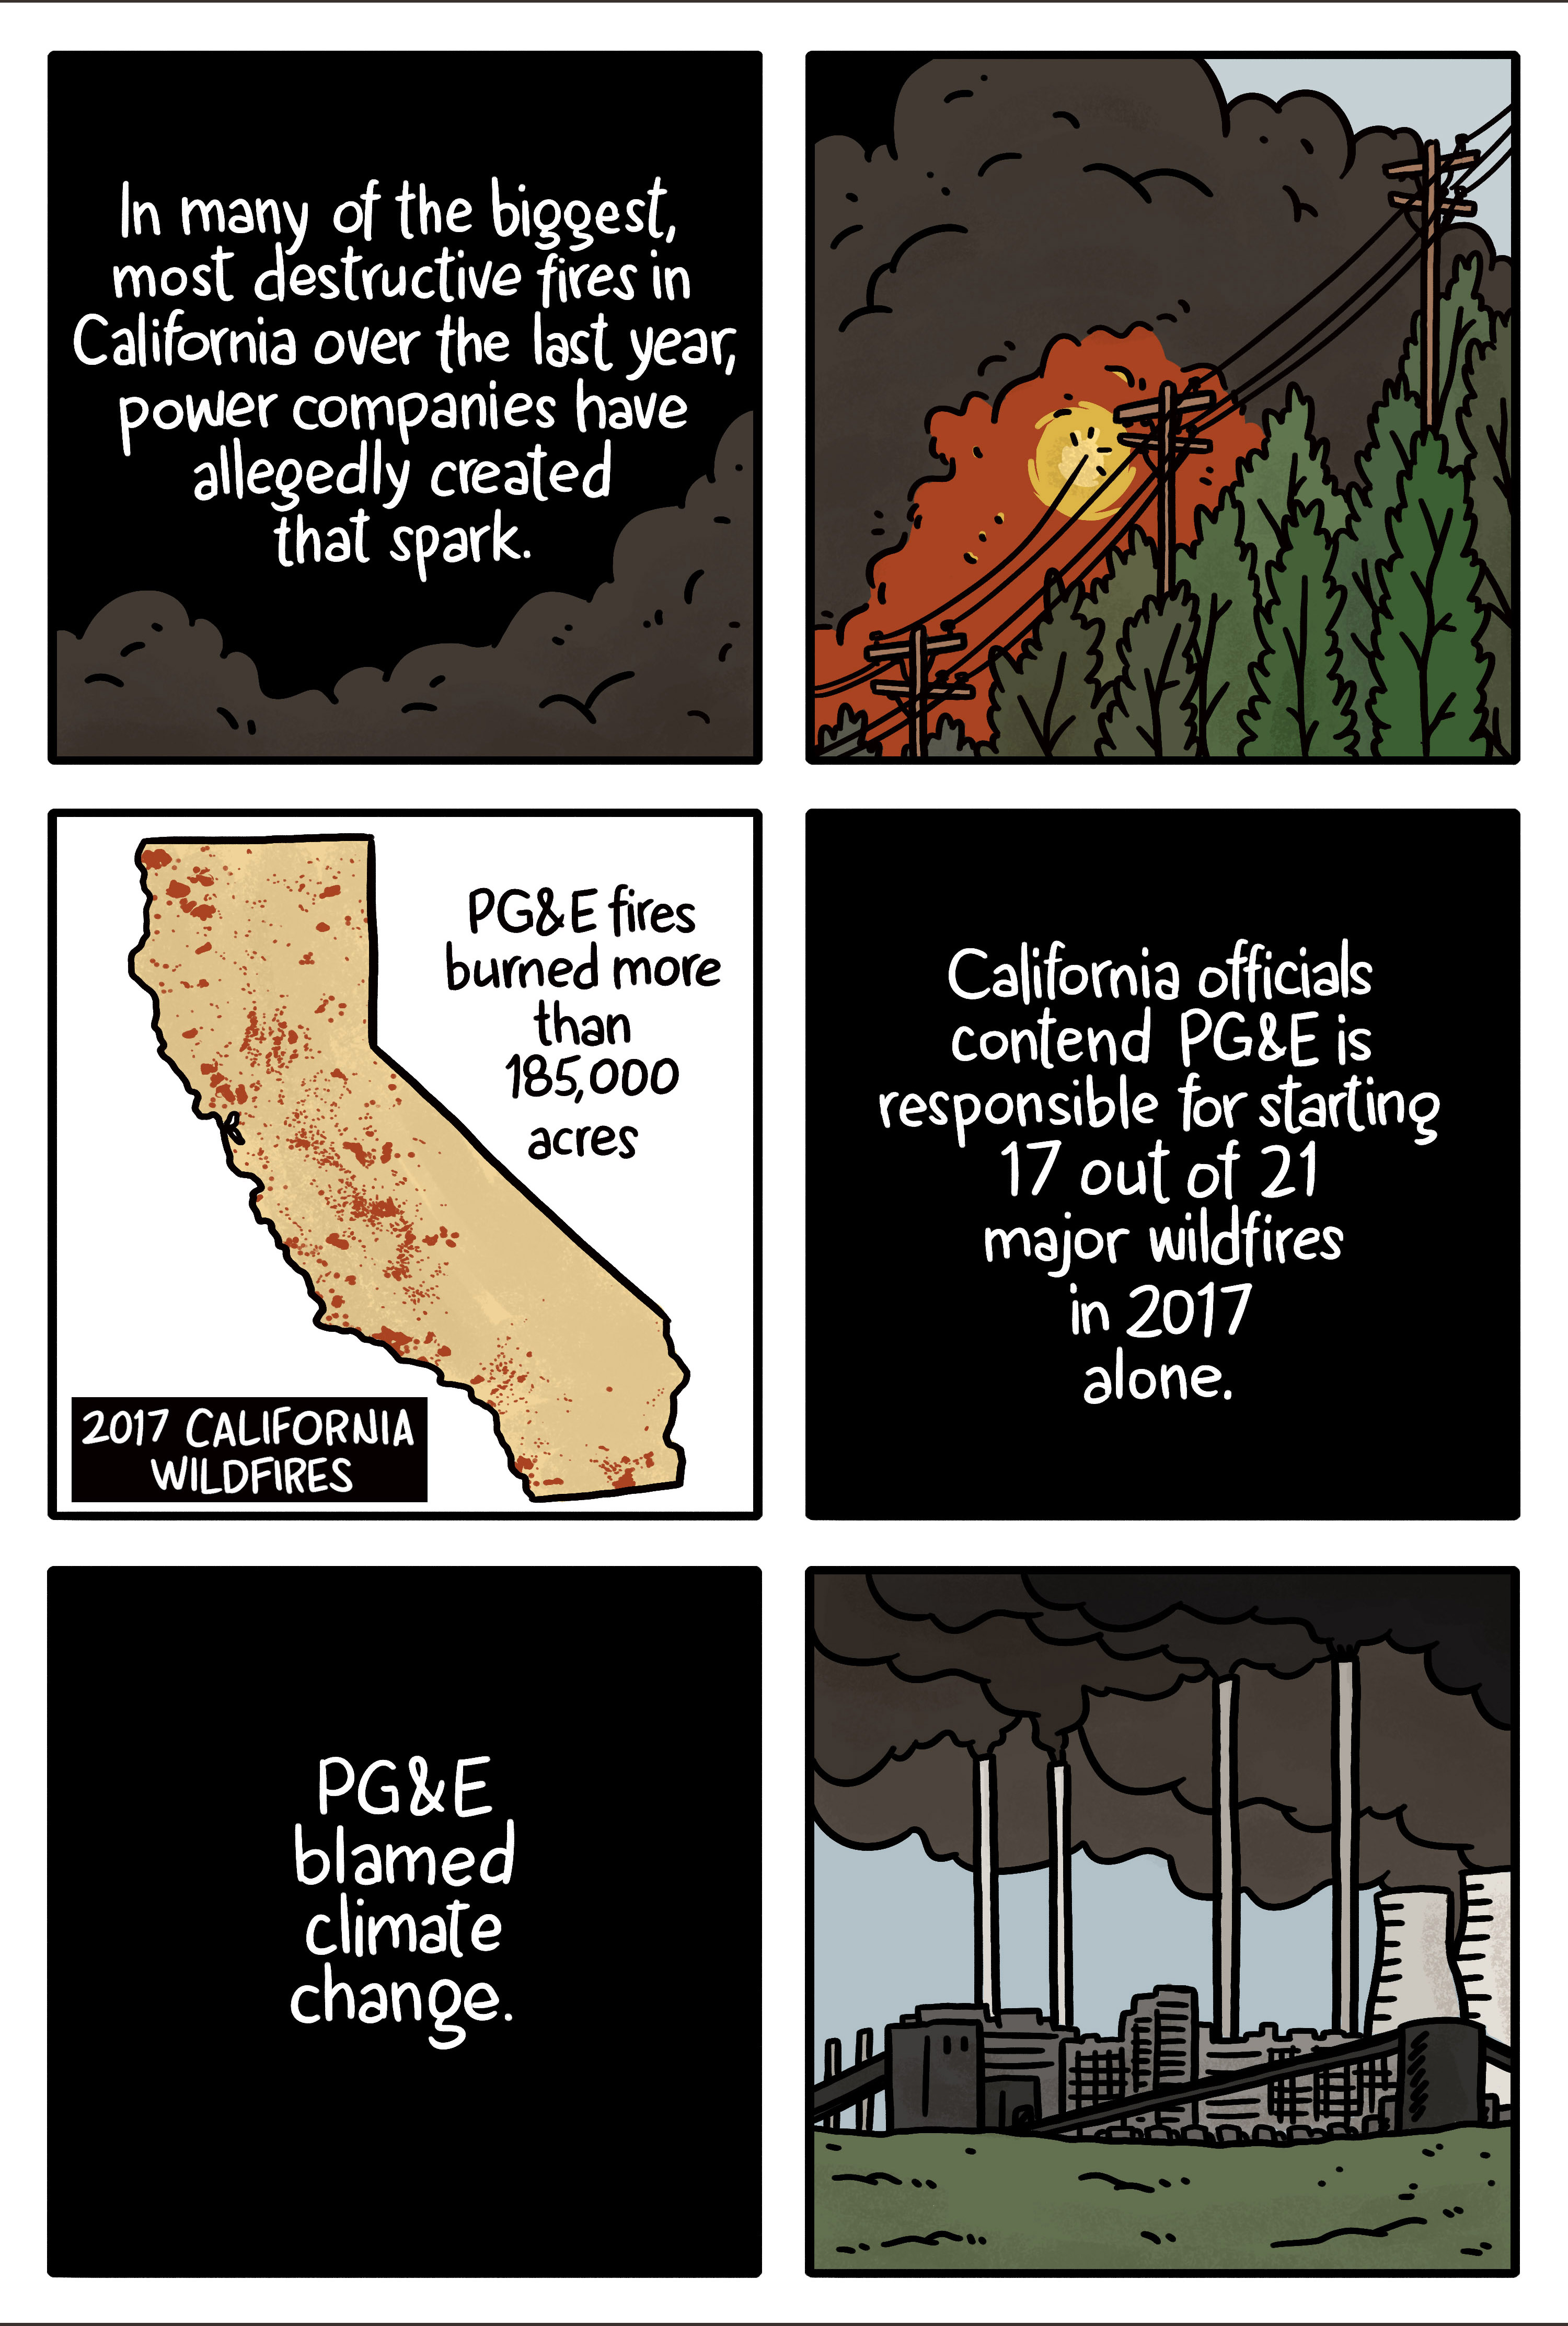 Cartoon explaining that many of California's fires were blamed on old power infrastructure from PG&E.